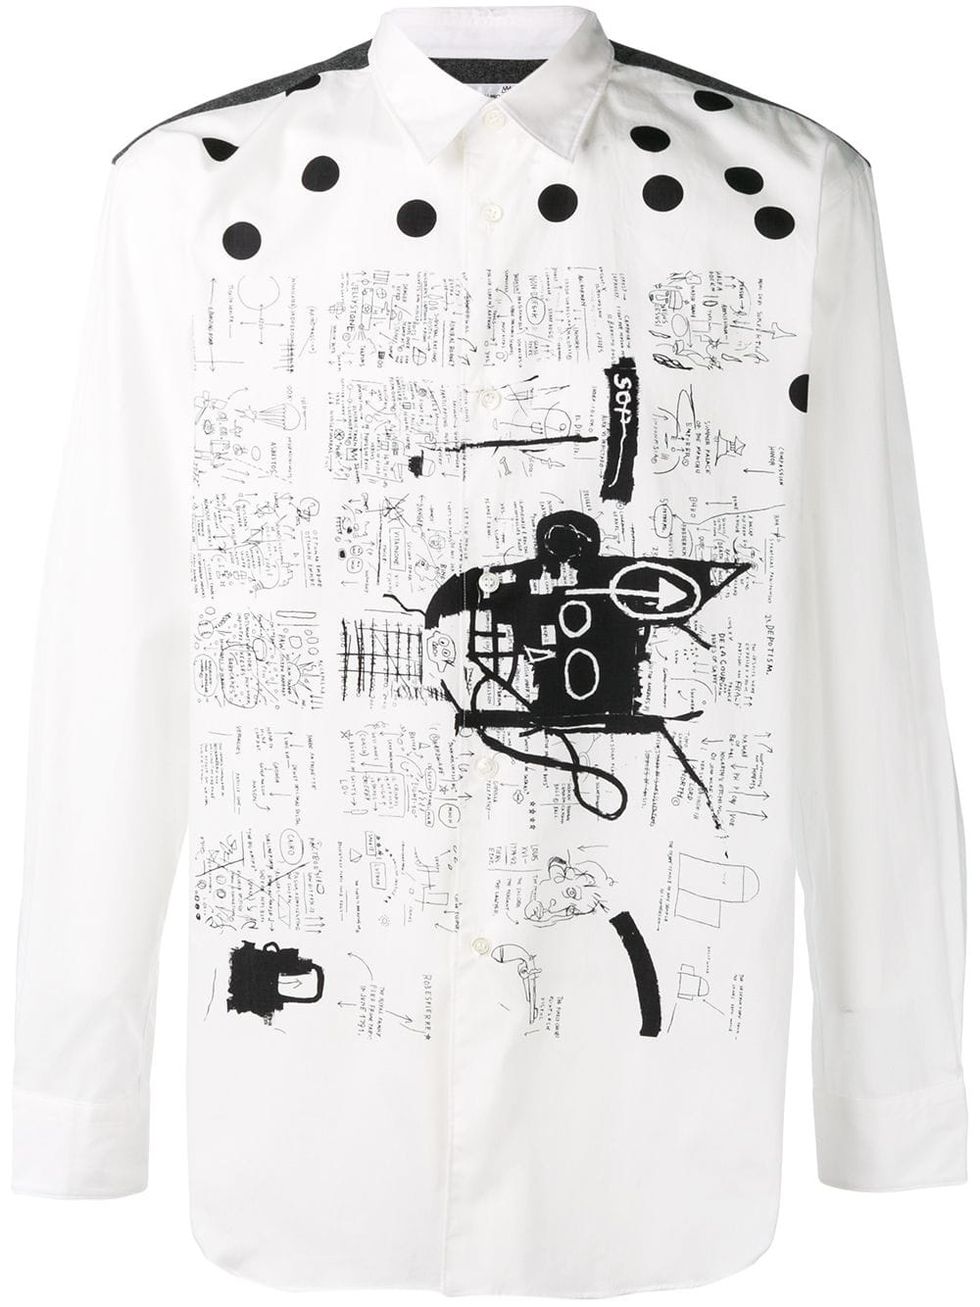 The New Coach x Jean-Michel Basquiat Collab Is Wearable Art